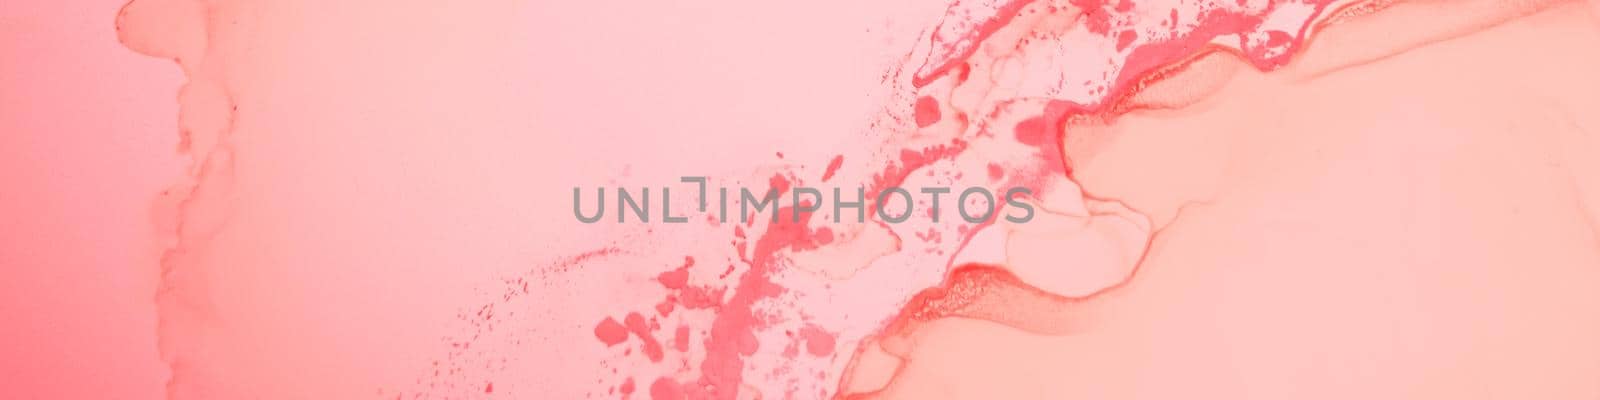 Rose Liquid Marble. Acrylic Mix. Oil Flow Design. Abstract Drops. Gentle Fluid Painting. Alcohol Luxury Marble. Delicate Wallpaper. Ink Modern Paint. Contemporary Pink Marble.